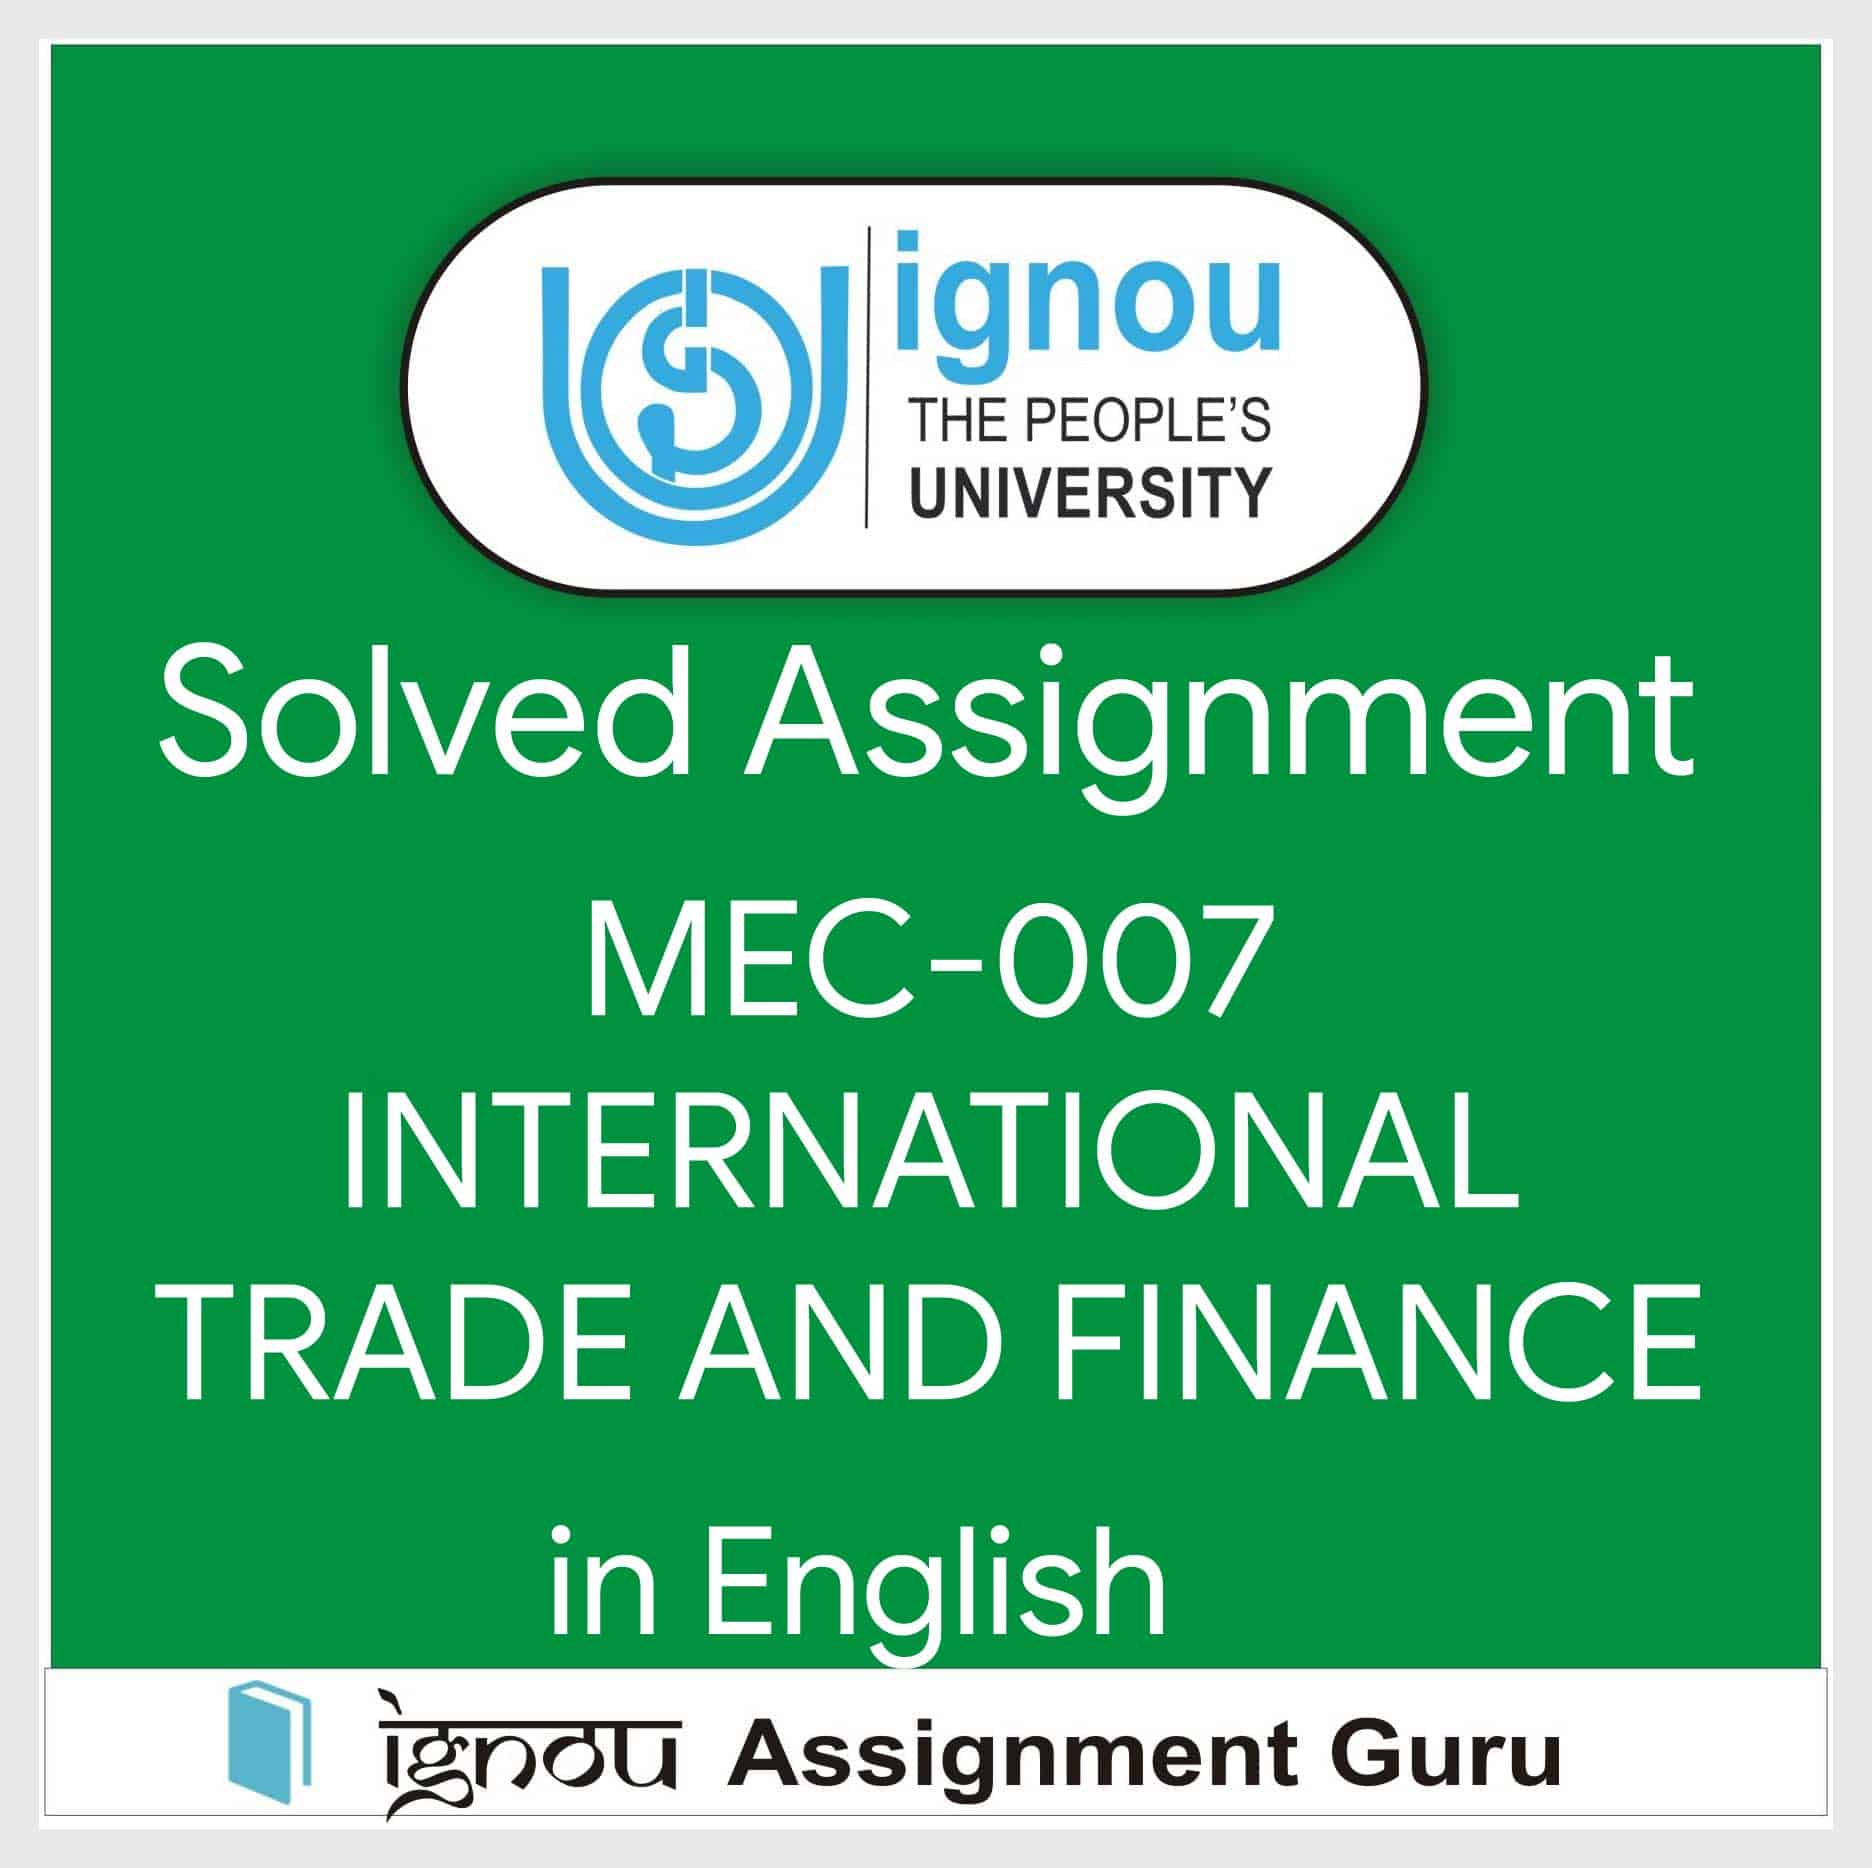 MEC-007 INTERNATIONAL TRADE AND FINANCE in English Solved Assignment 2022-2023